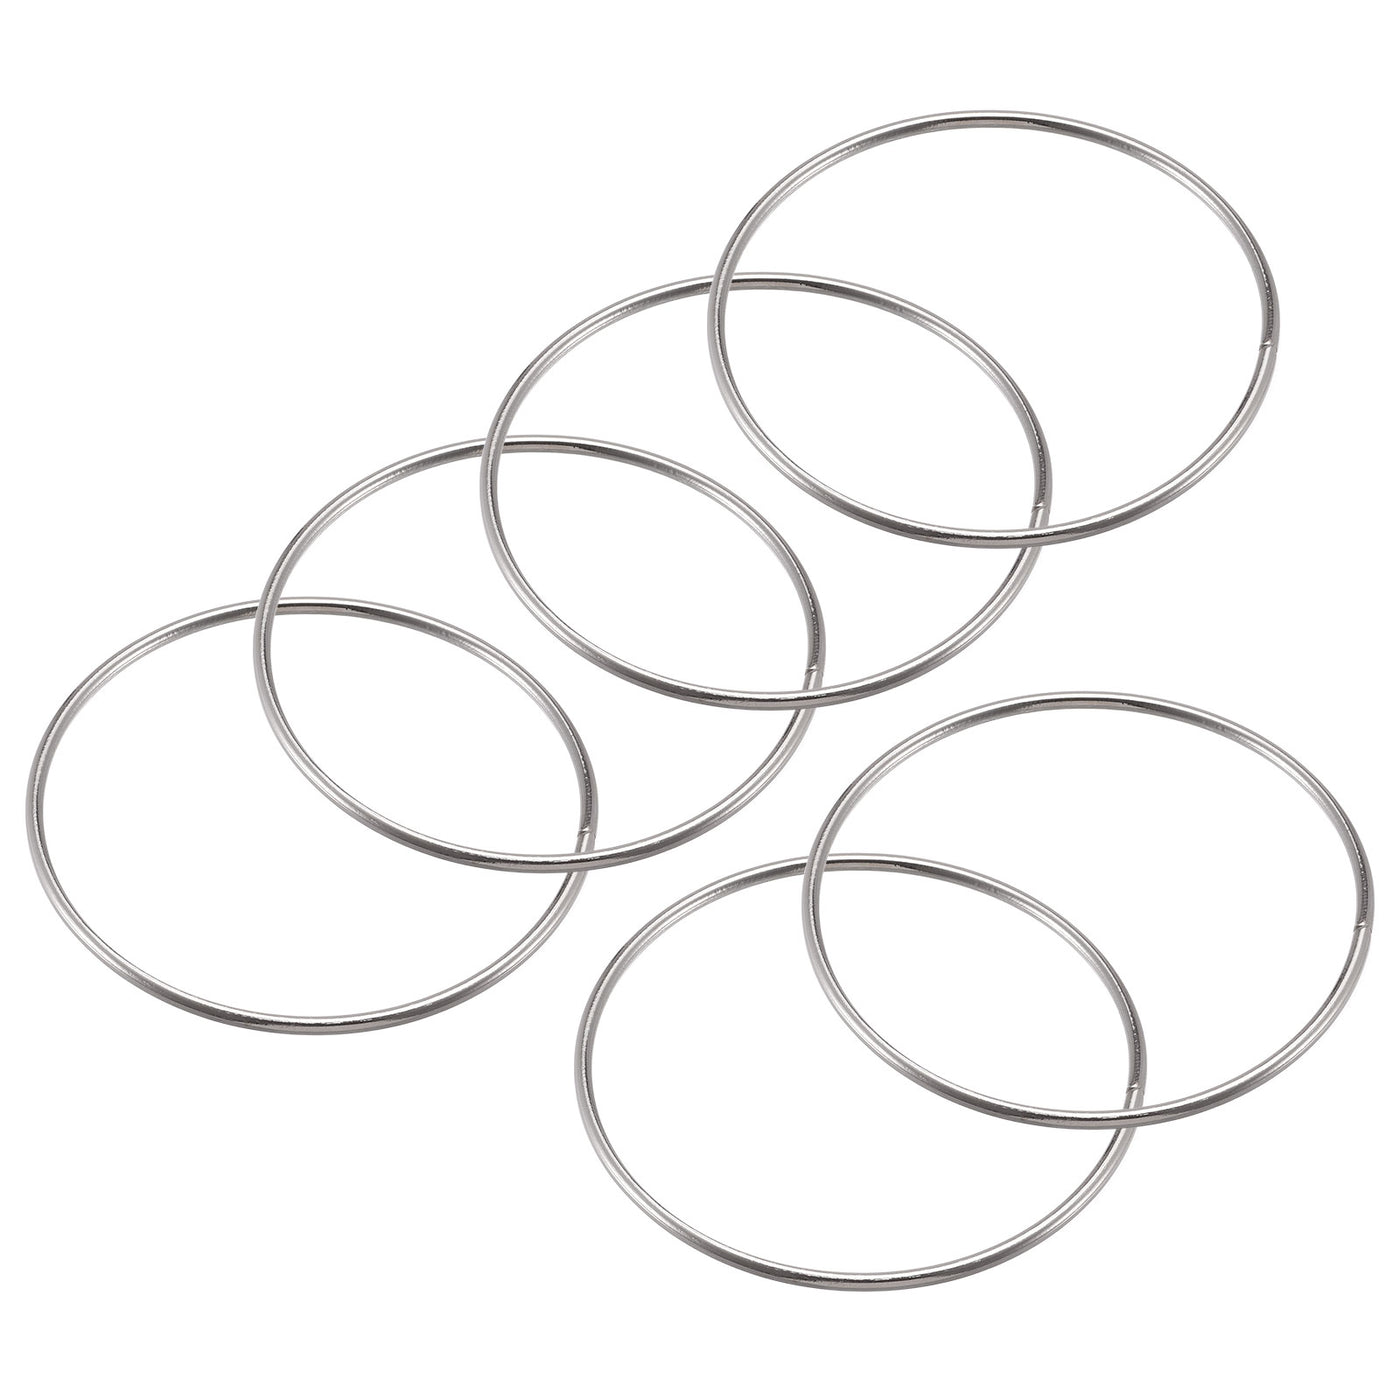 uxcell Uxcell 80mm(3.15") OD Metal O Ring Non-Welded Craft Hoops for DIY Silver Tone 10pcs